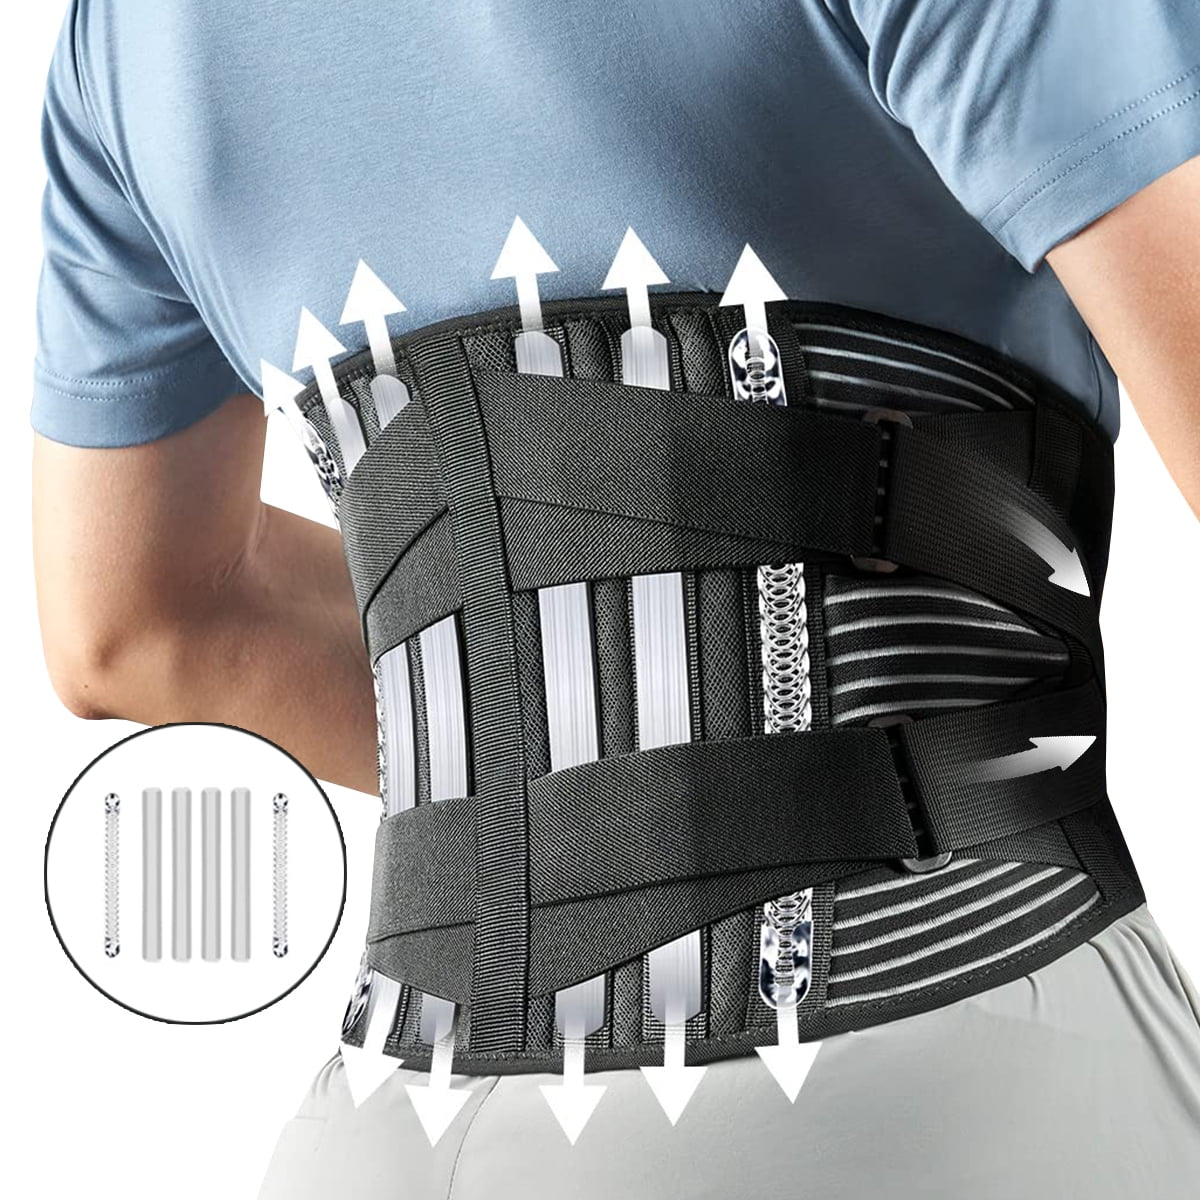 NeoHealth Lower Back Brace | Lumbar Support | Wrap for Recovery, Workout,  Herniated Disc Pain Relief | Waist Trimmer Weight Loss Ab Belt | Exercise